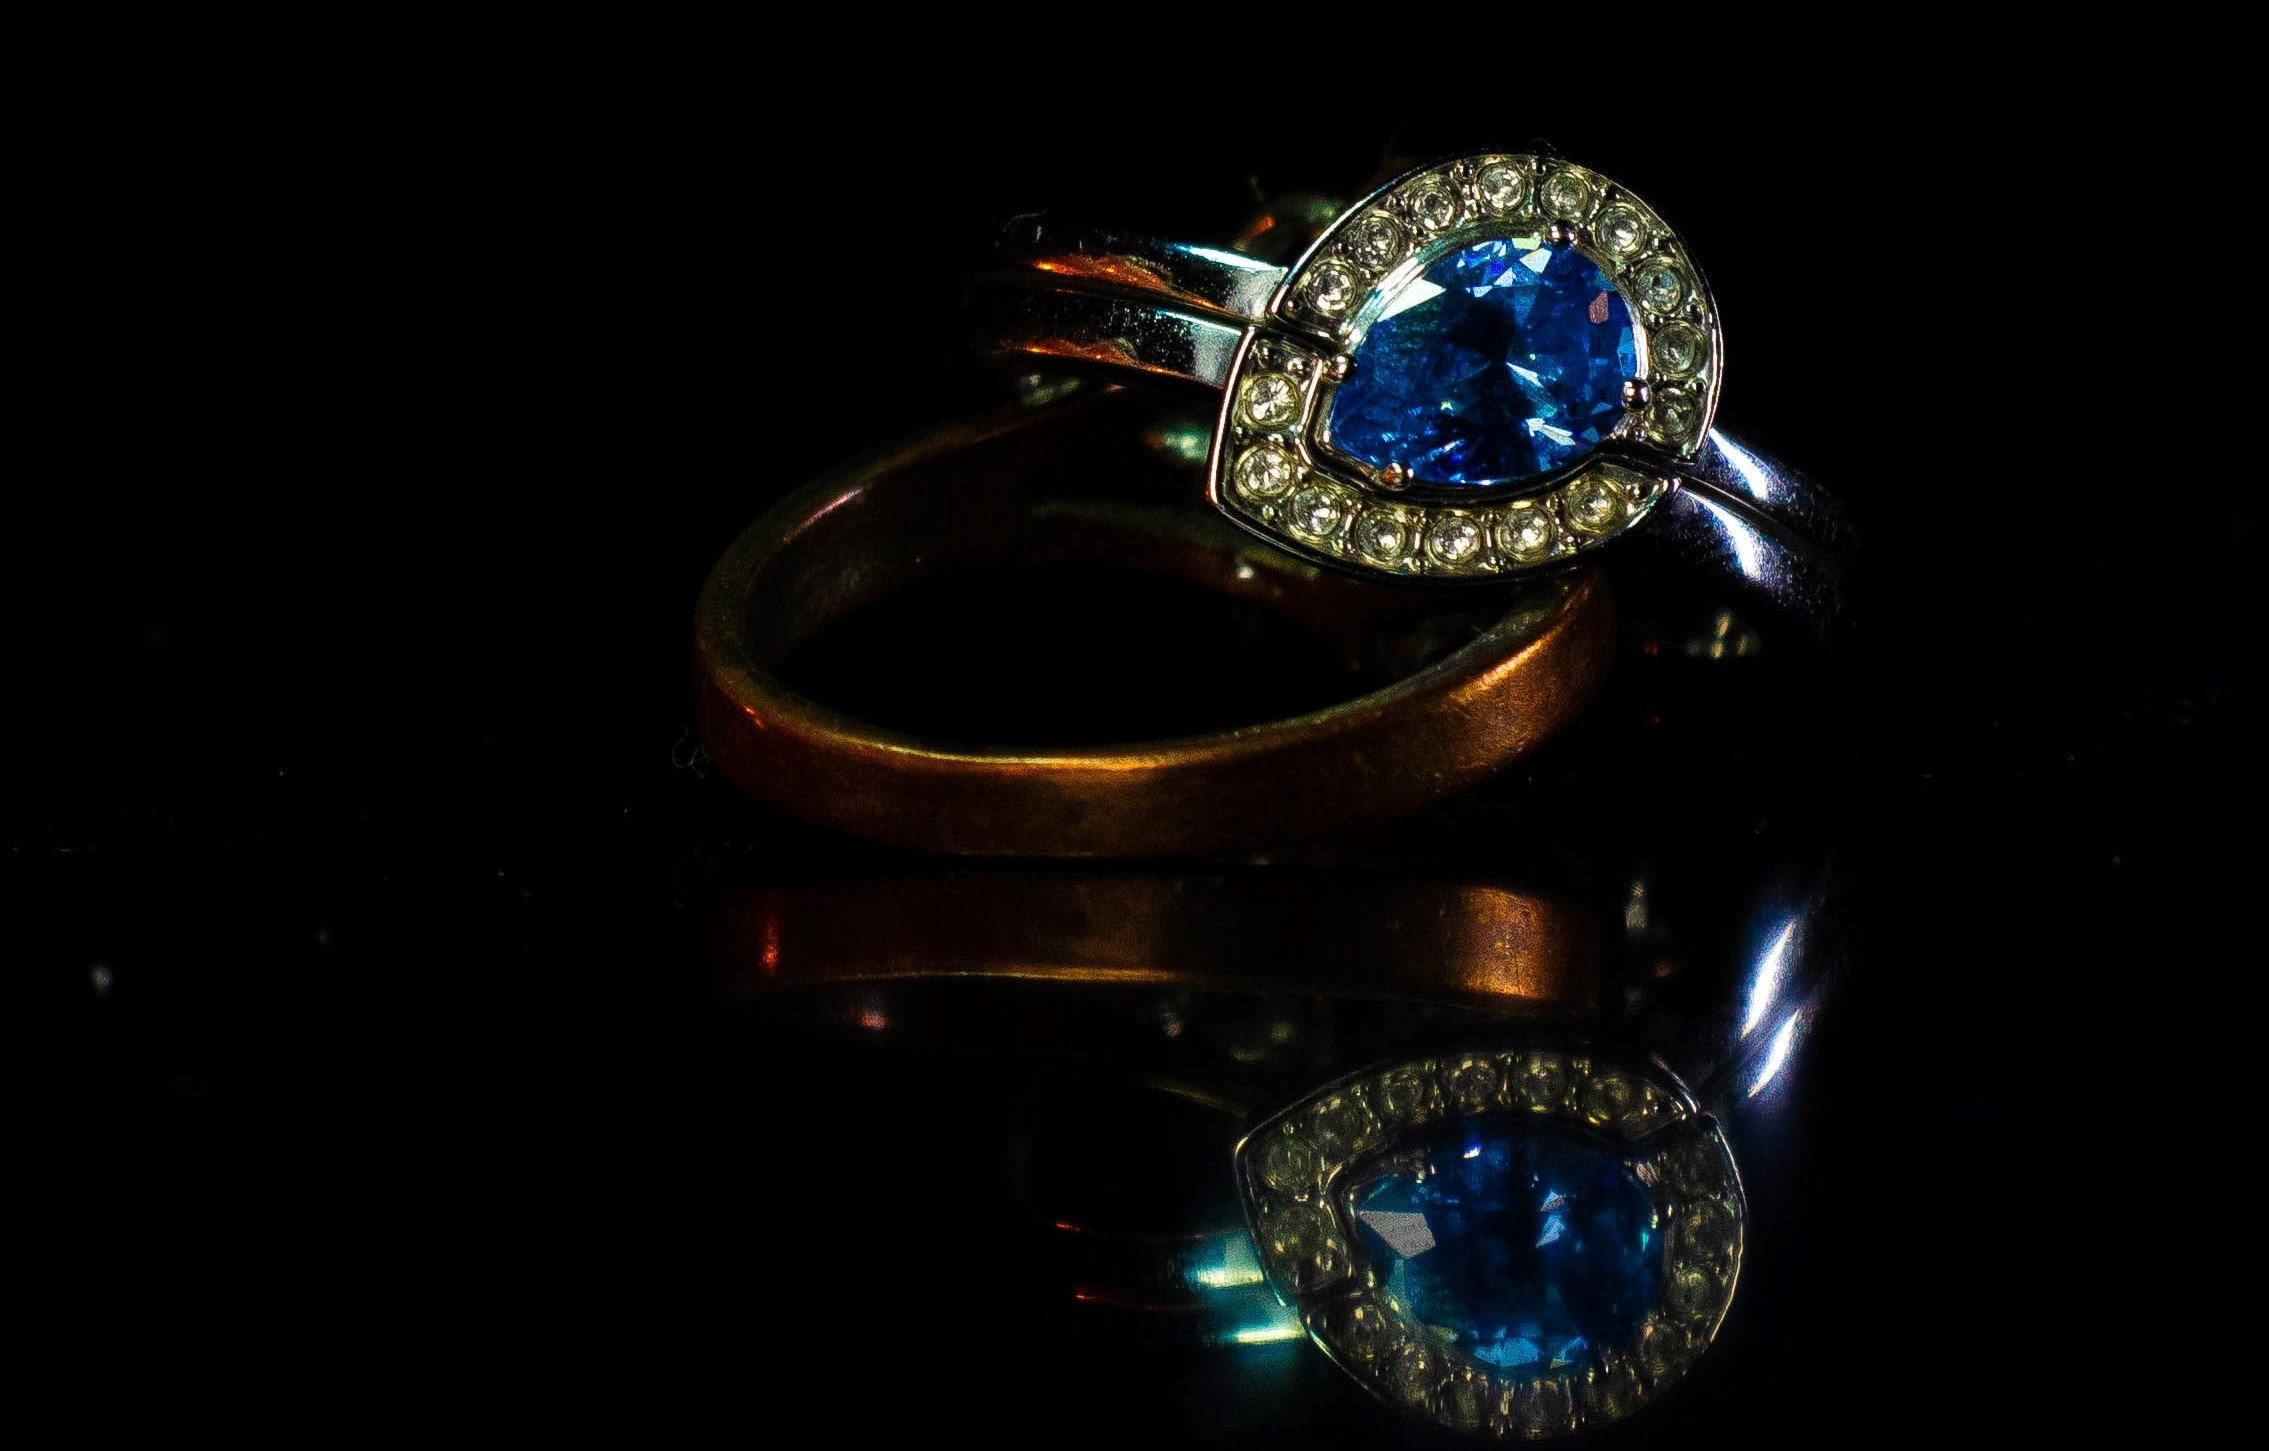 The ring was a family heirloom worth $300,000. | Source: Unsplash